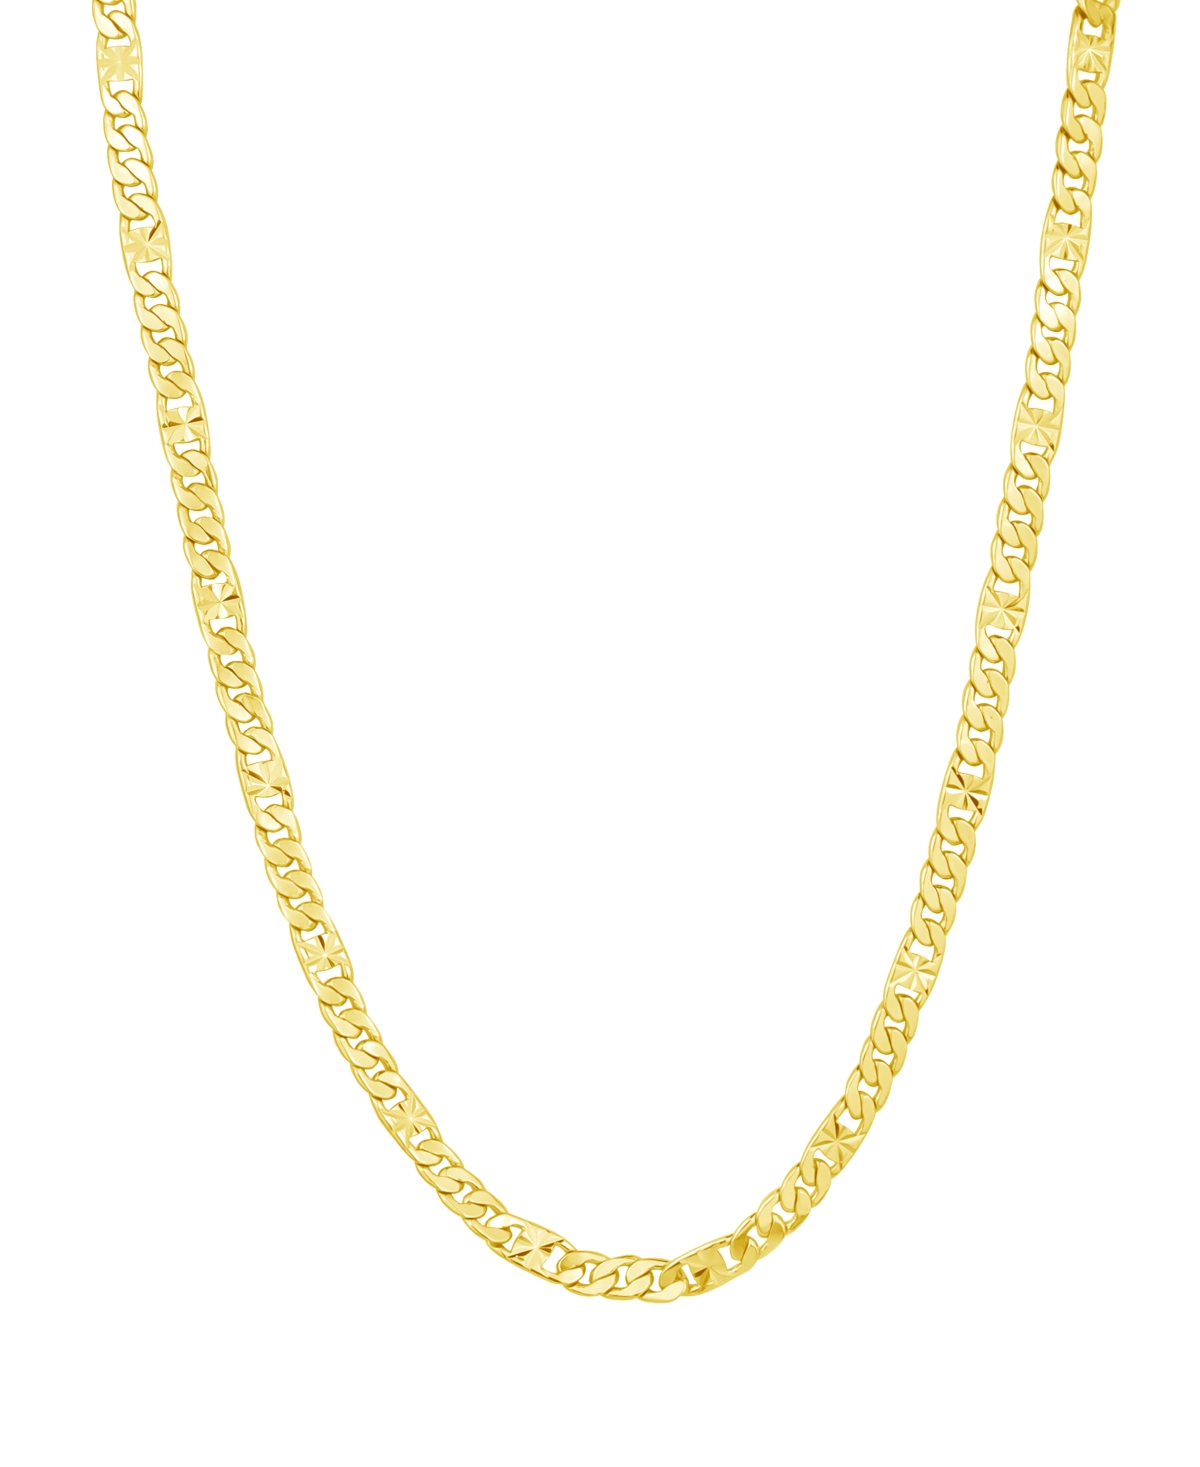 Diamond Cut Silver-Plated or 18K Gold-Plated Cuban Chain Necklace - Gold